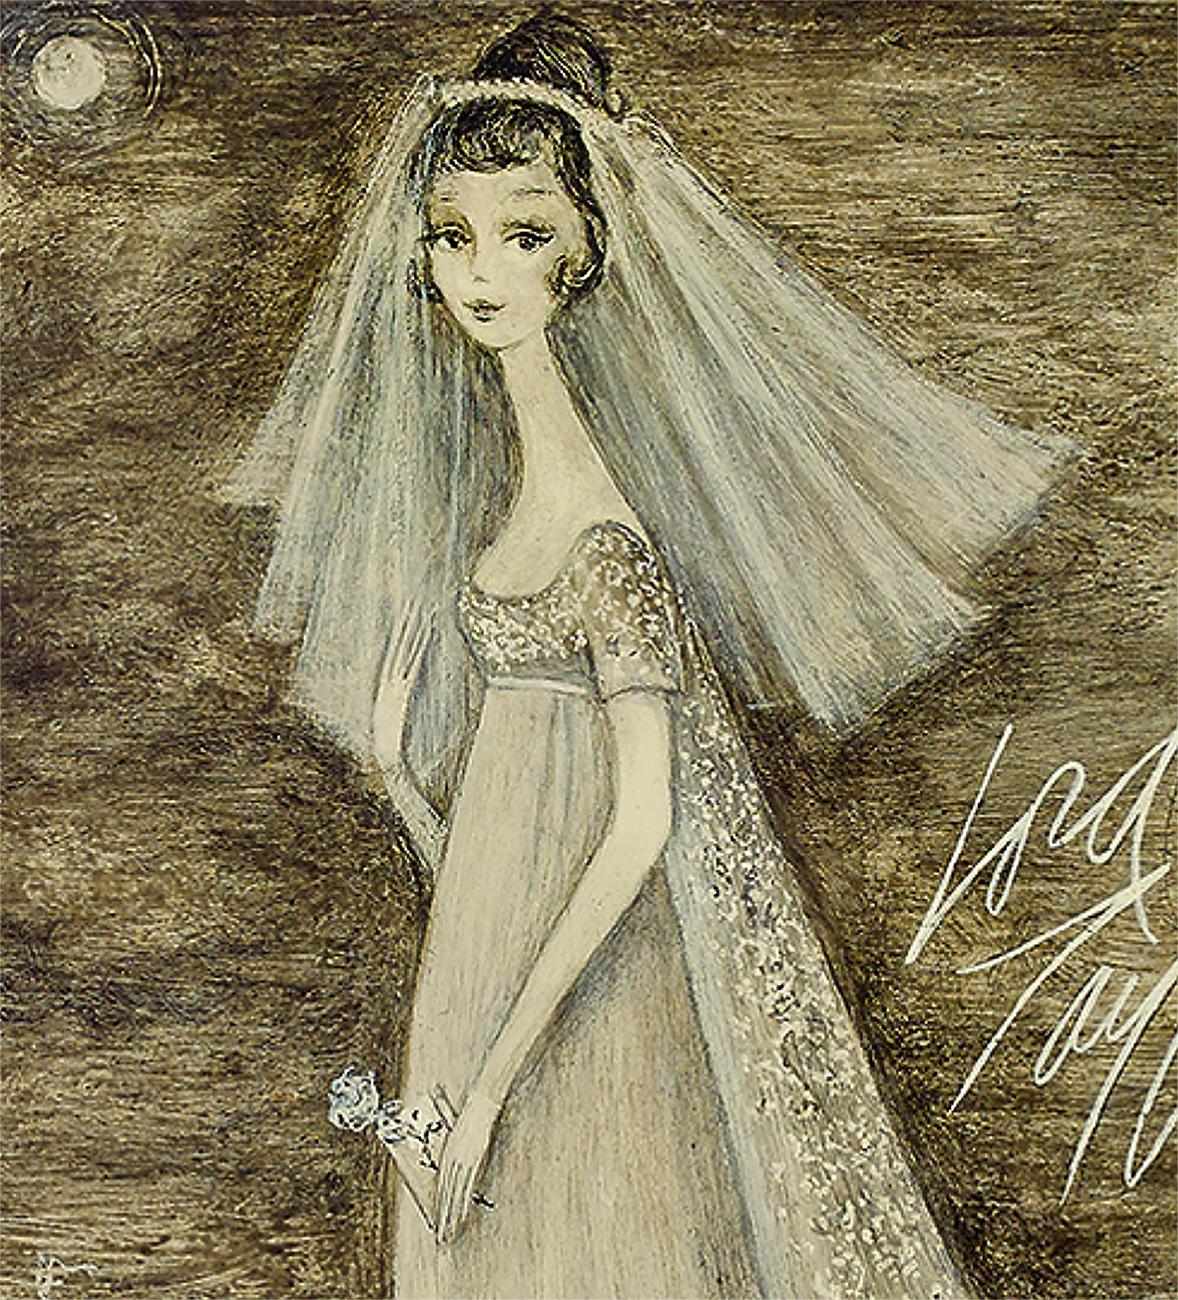 In The Bride's Shop, Lord & Taylor - Painting by Carol Blanchard